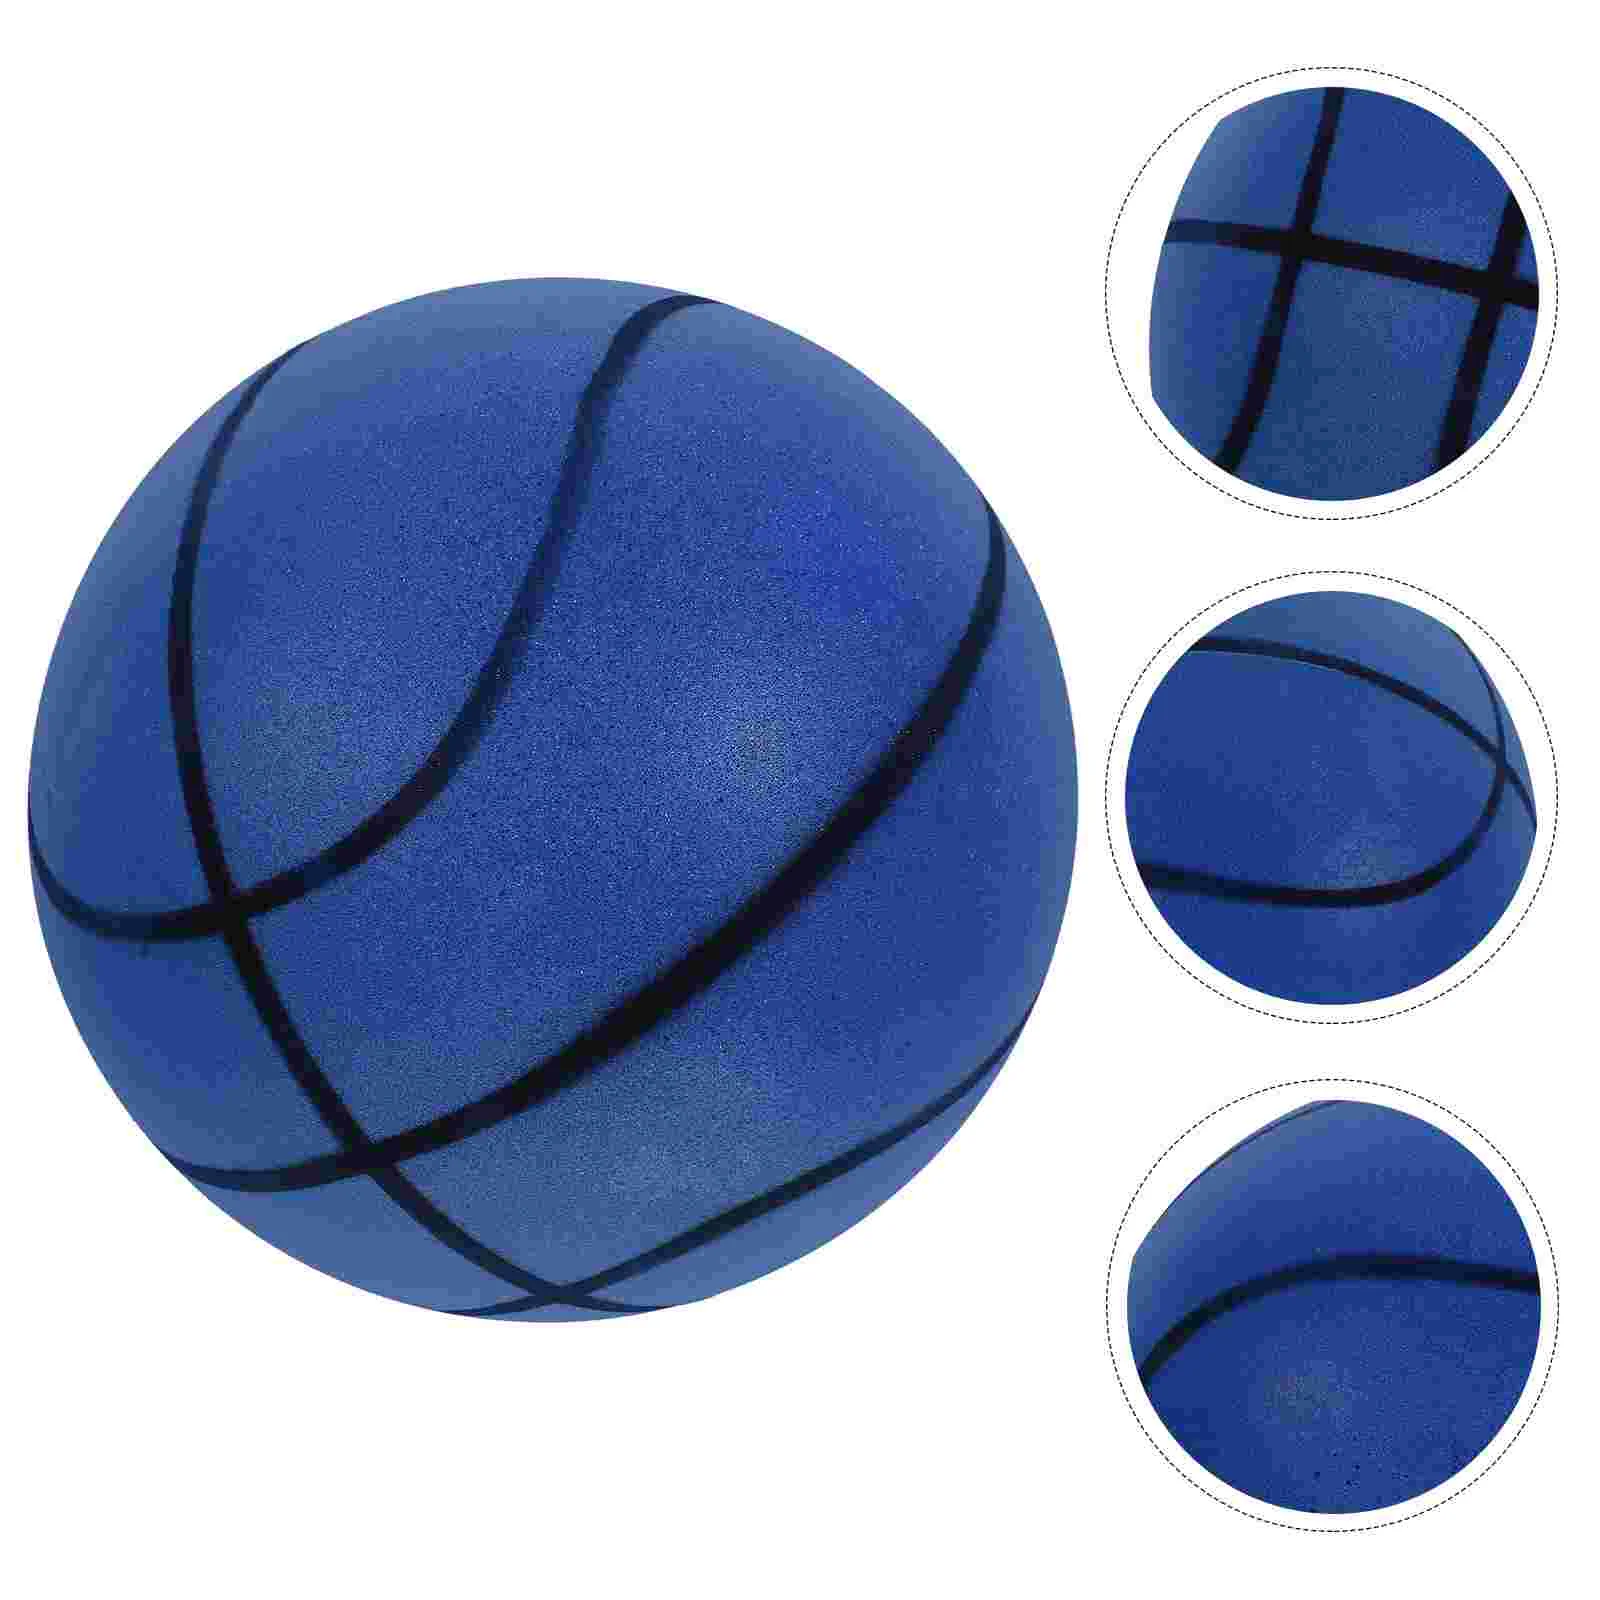 

Bouncing Ball Home Bouncy Balls Toys Large Lightweight Jumping Silent Kids Polyurethane Child